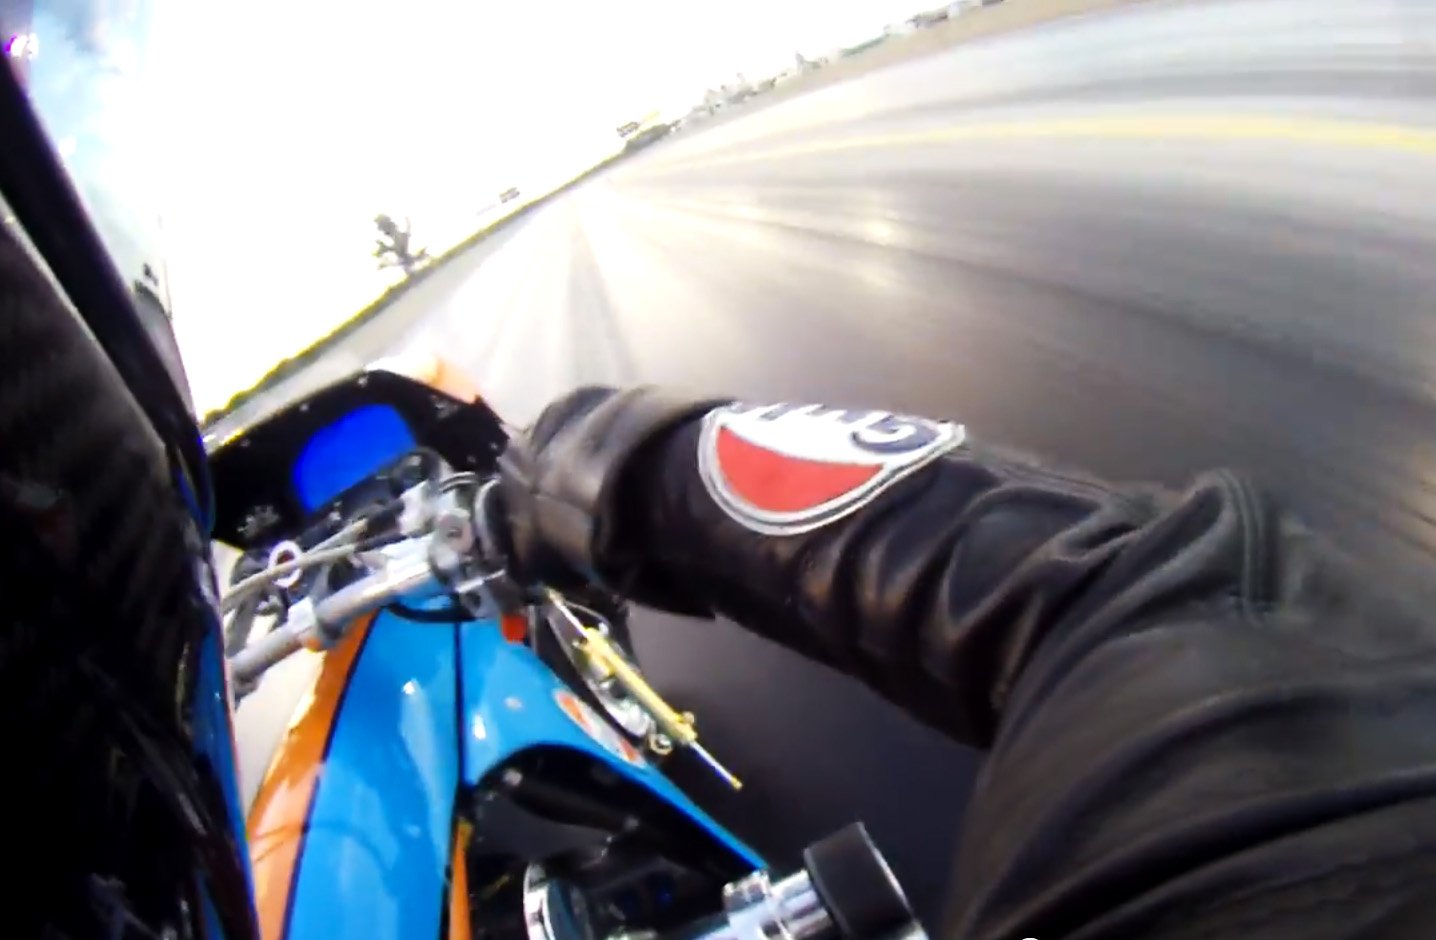 5.87 Exhilarating Seconds Aboard Ian King's Top Fuel Motorcycle